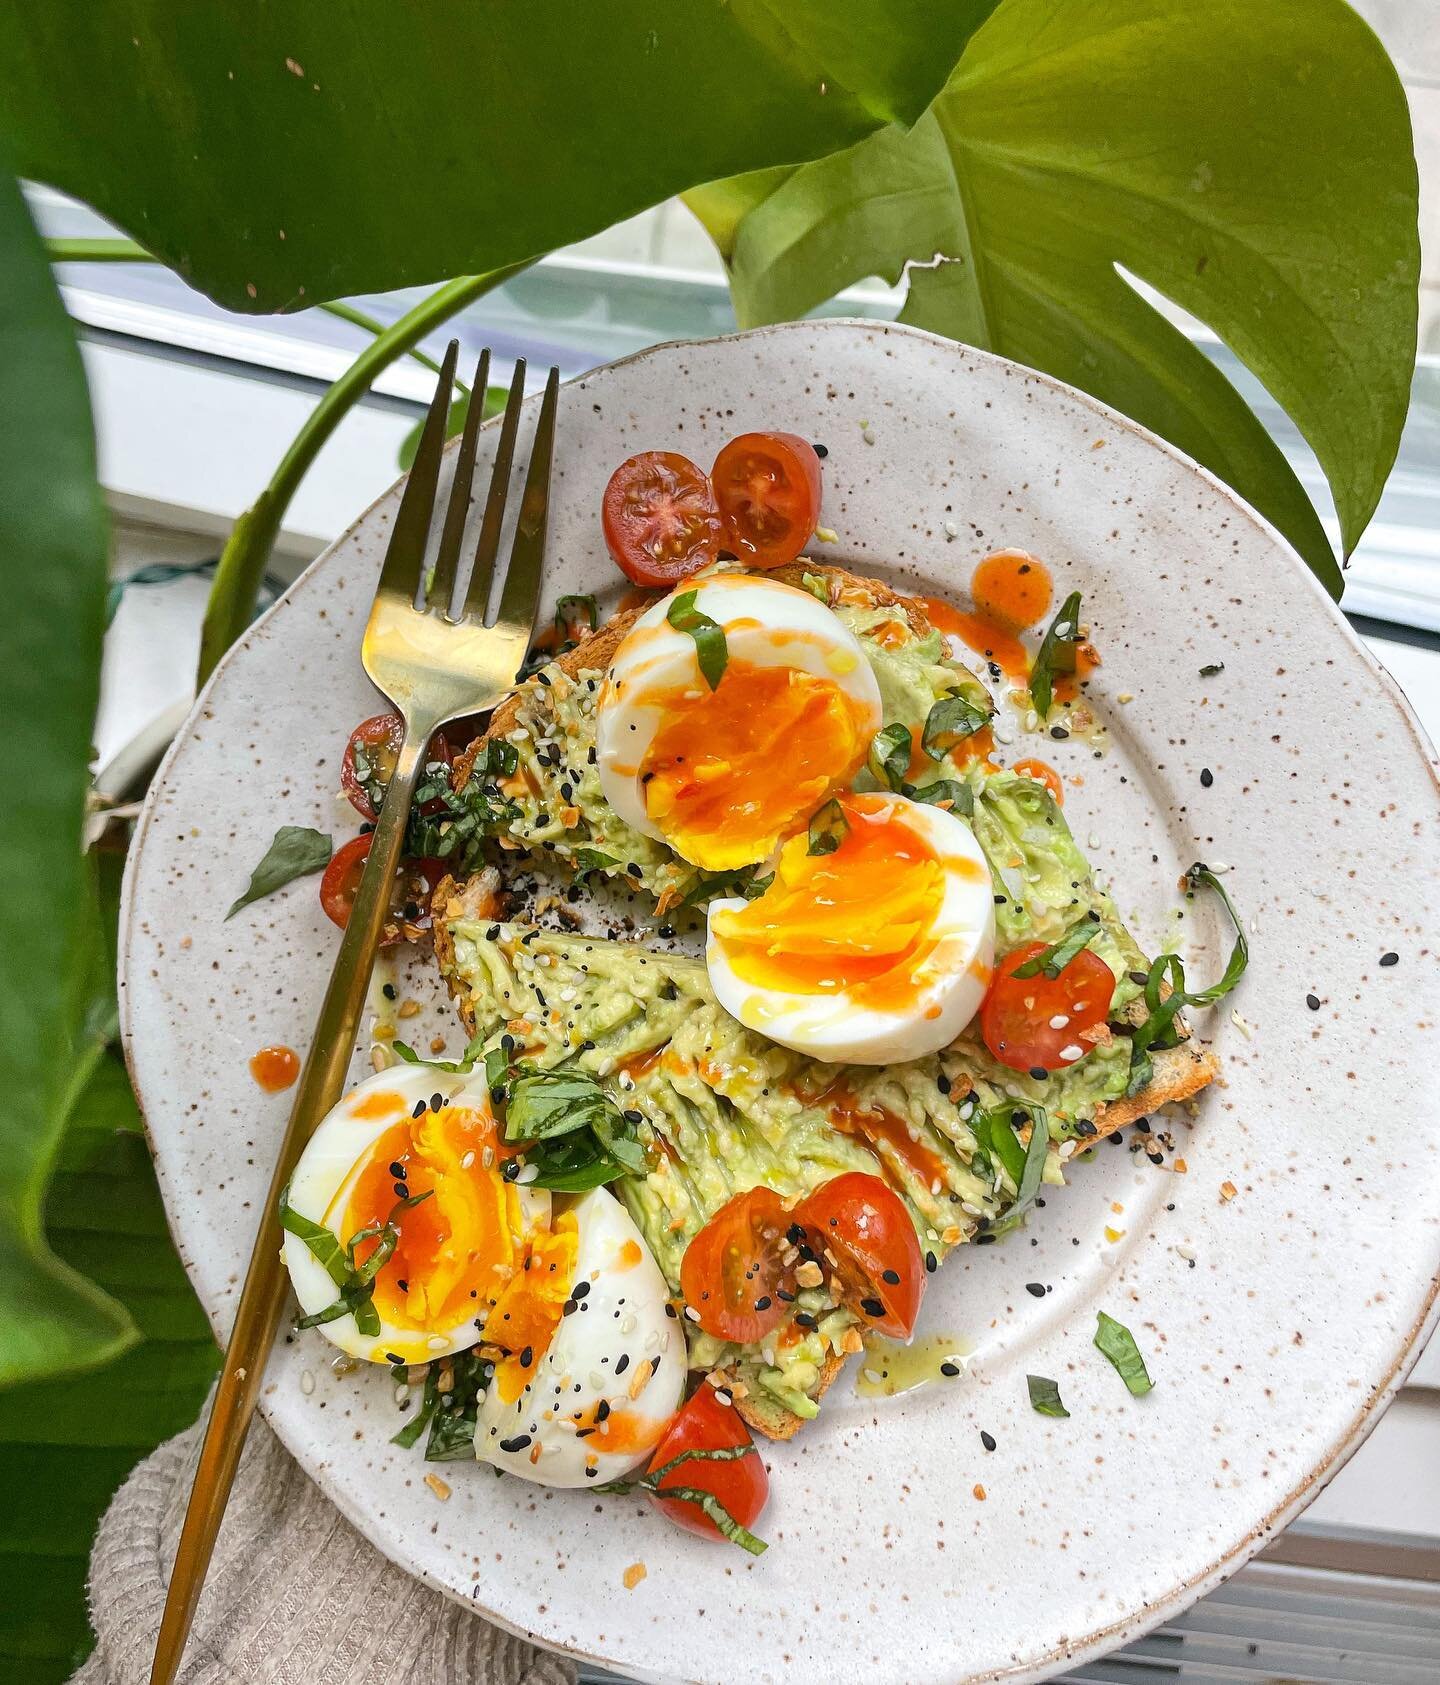 fueling breakfast with ingredients from this week&rsquo;s @hungryroot: @angelicbakehouse sprouted grain bread, avocado, @vitalfarms eggs, @yellowbirdsauce hot sauce, cherry tomatoes + basil and bagel seasoning 🍞🥑